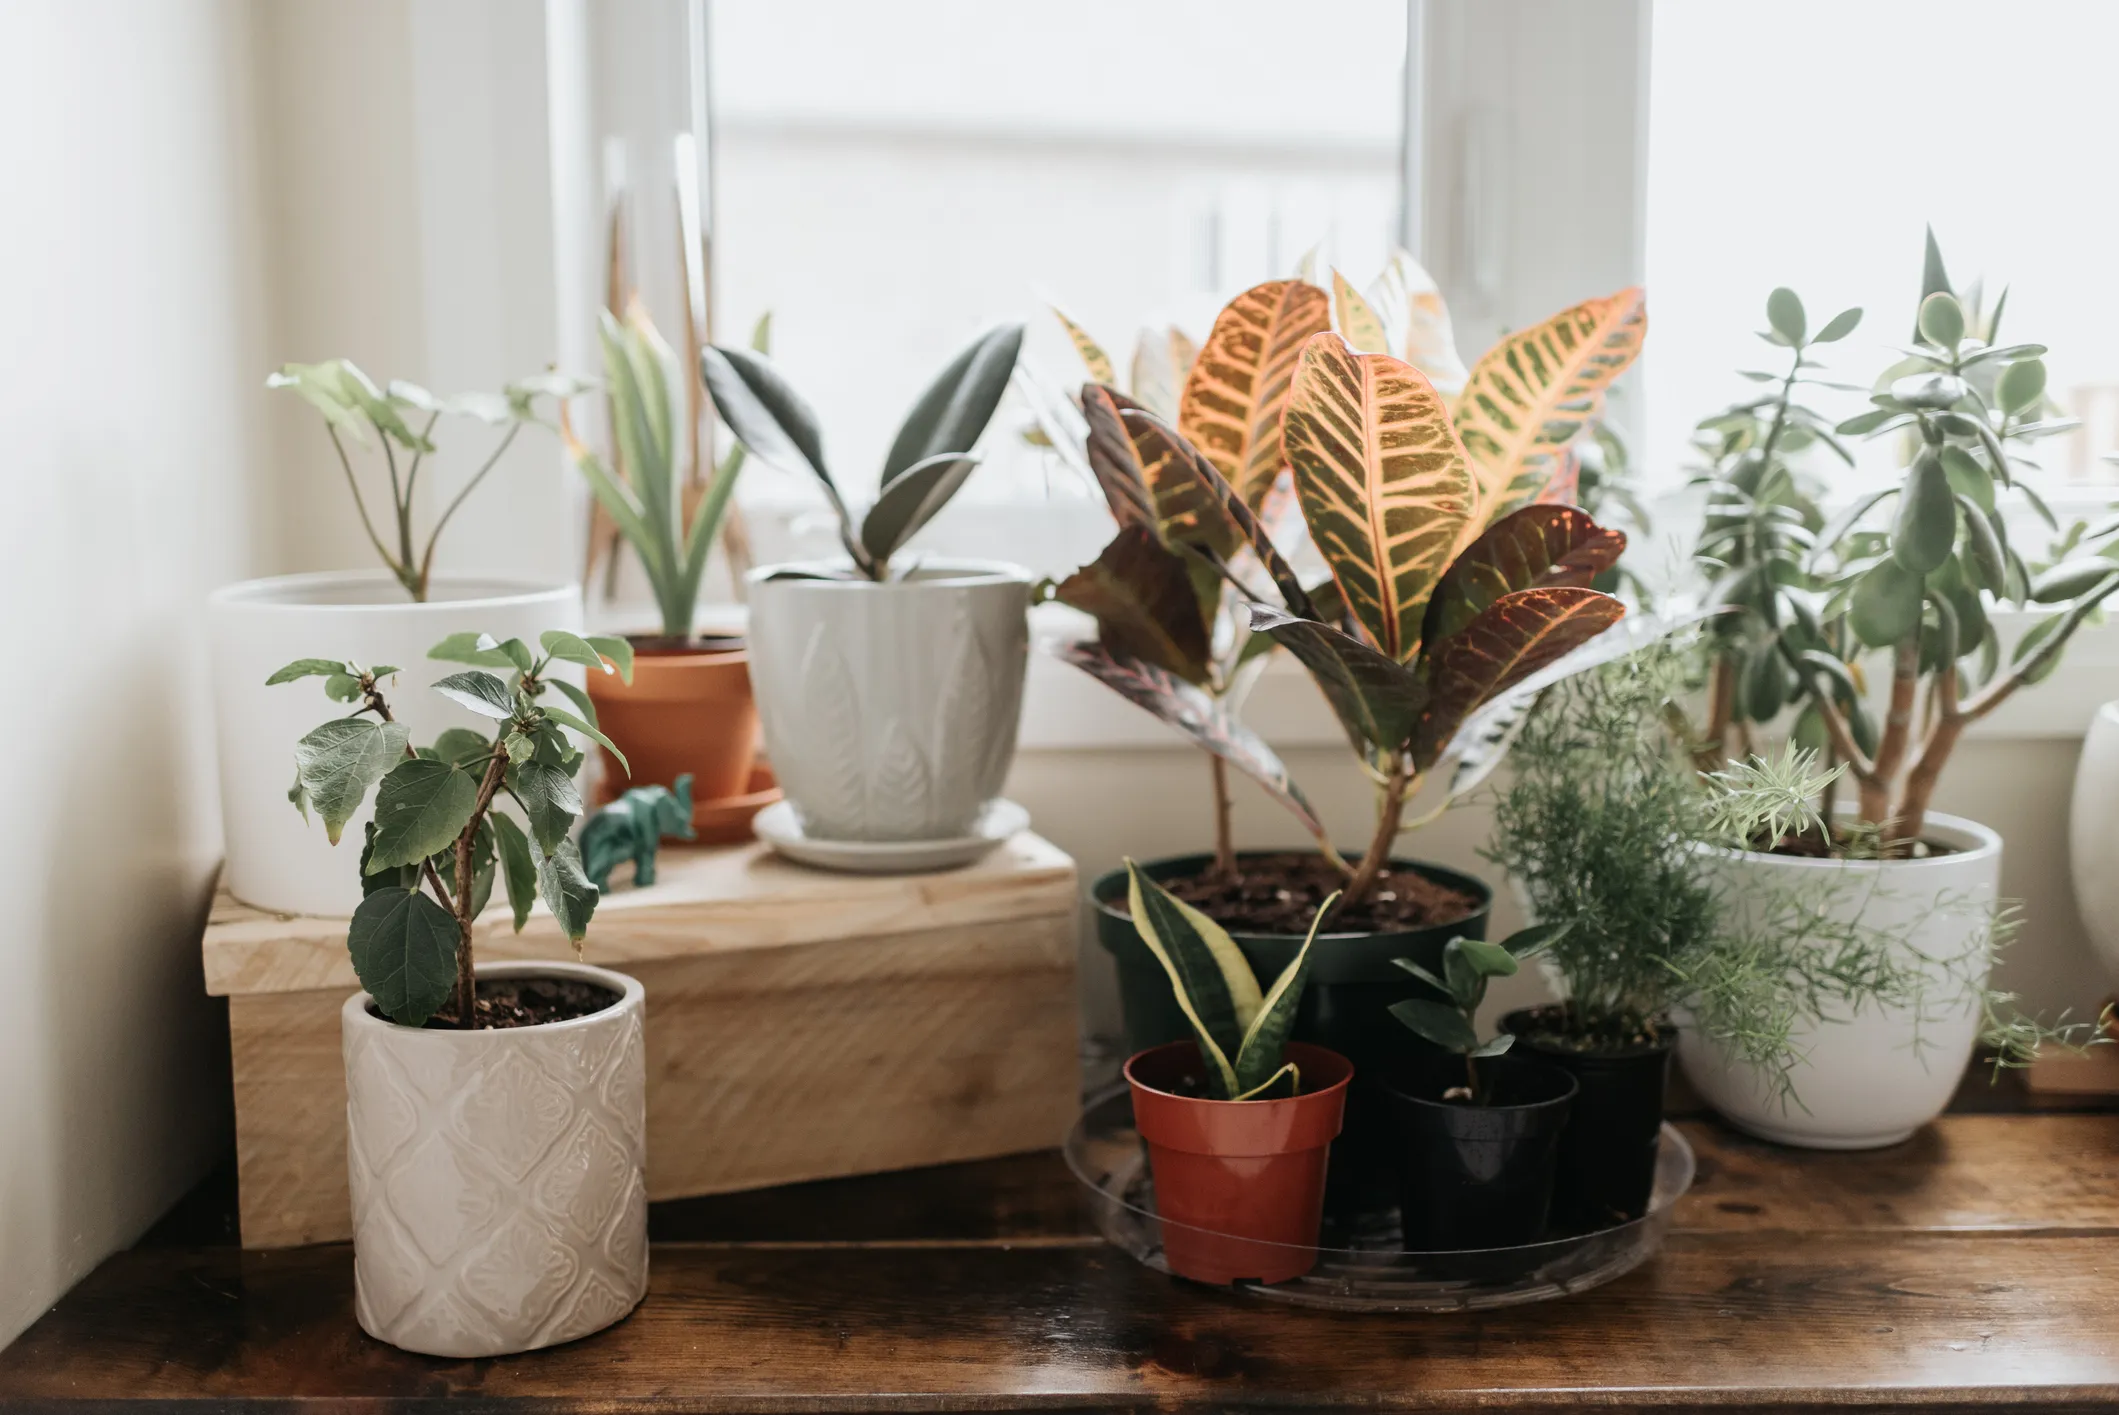 House Plants That Are Easy to Keep Alive